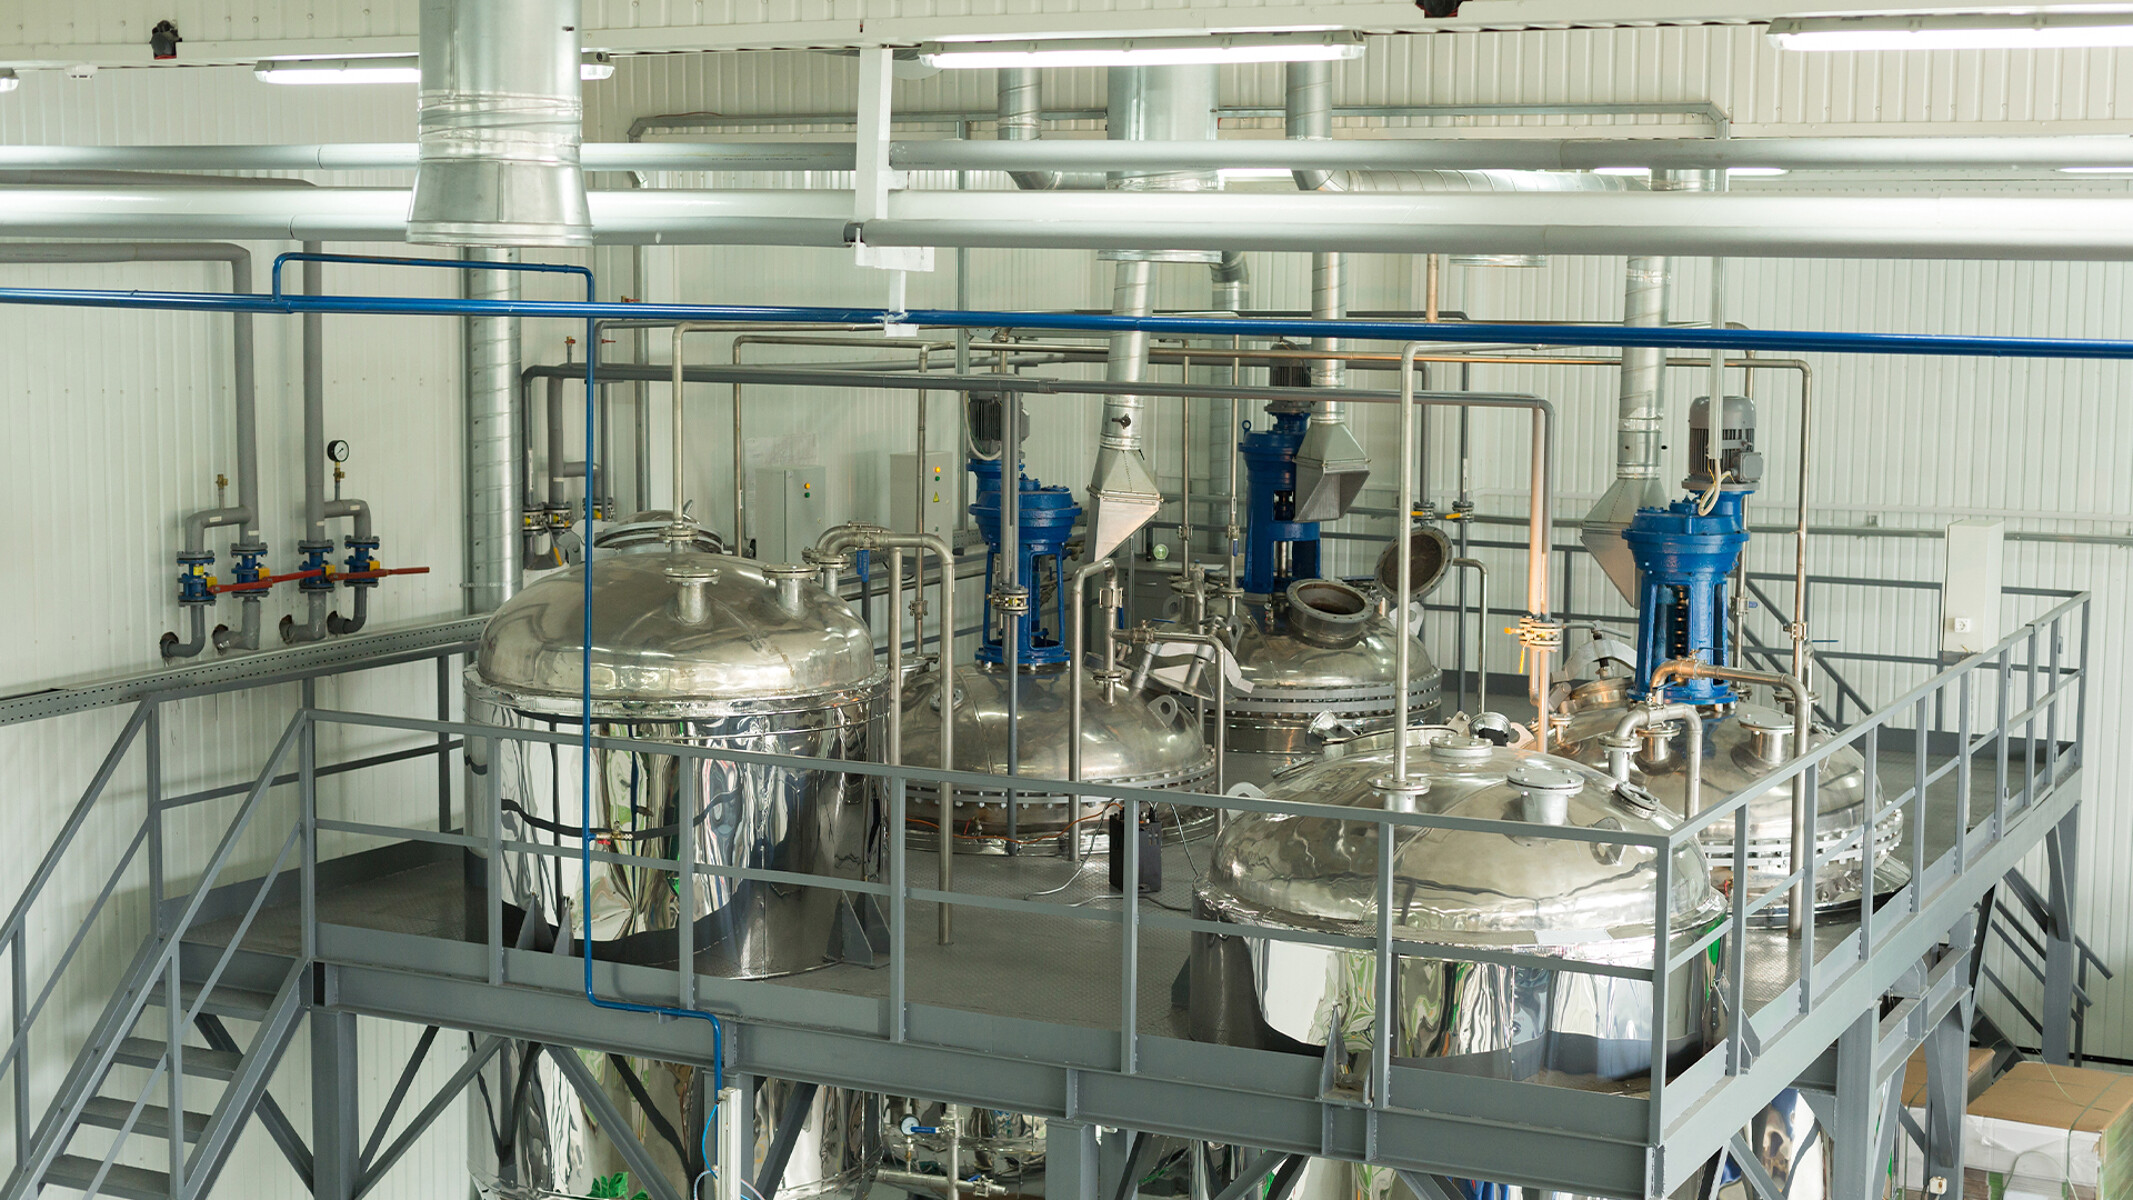 Large storage vats inside a speciality chemicals production plant